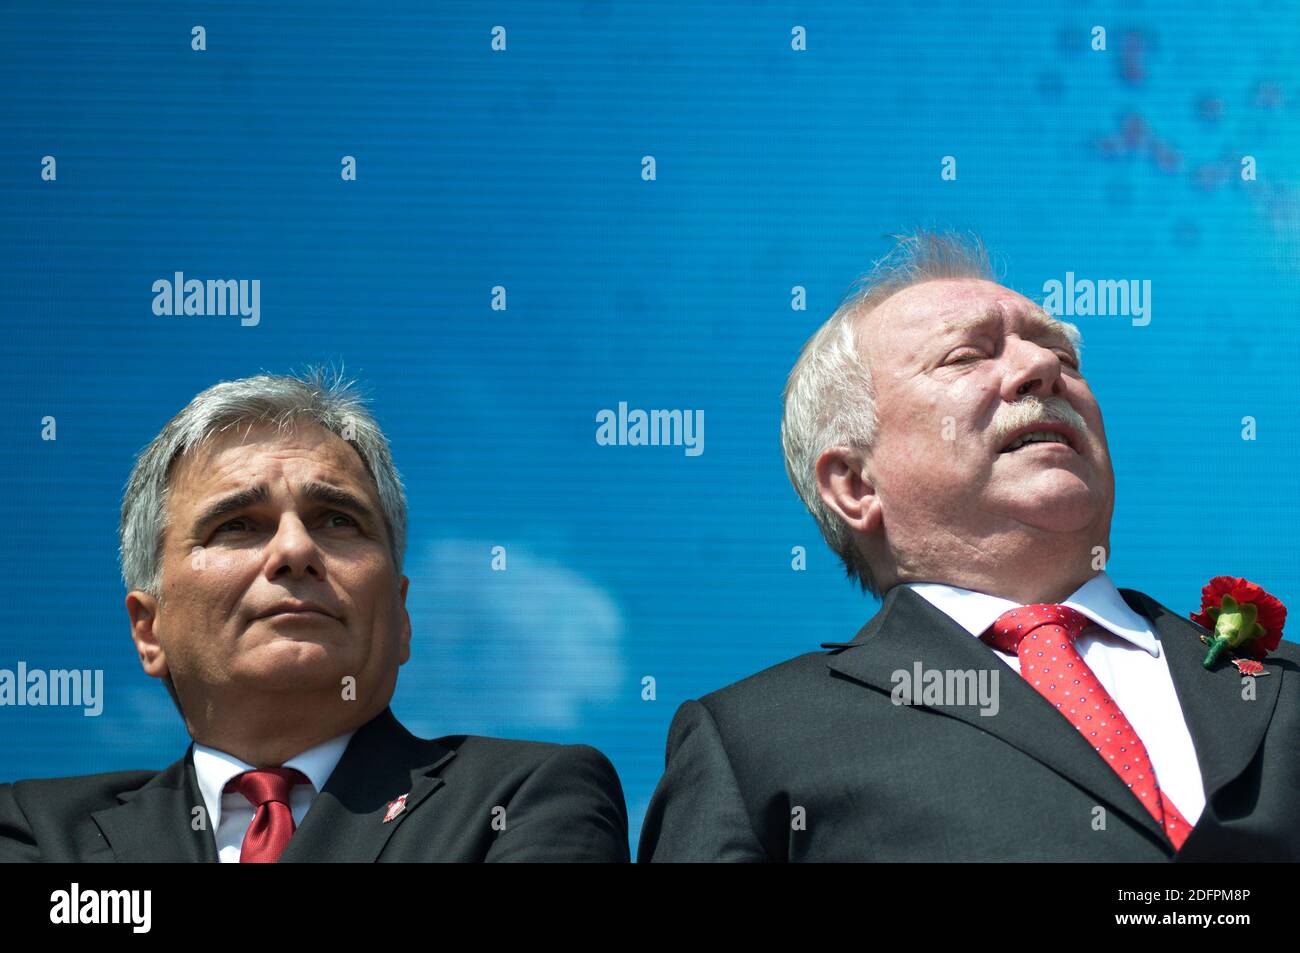 Michael Häupl is an Austrian politician (SPÖ- Social Democratic Party of Austria) and was Mayor and Governor of Vienna from November 7, 1994 to May 24, 2018. Picture shows Werner Faymmann (L) and Michael Häupl (R). Stock Photo